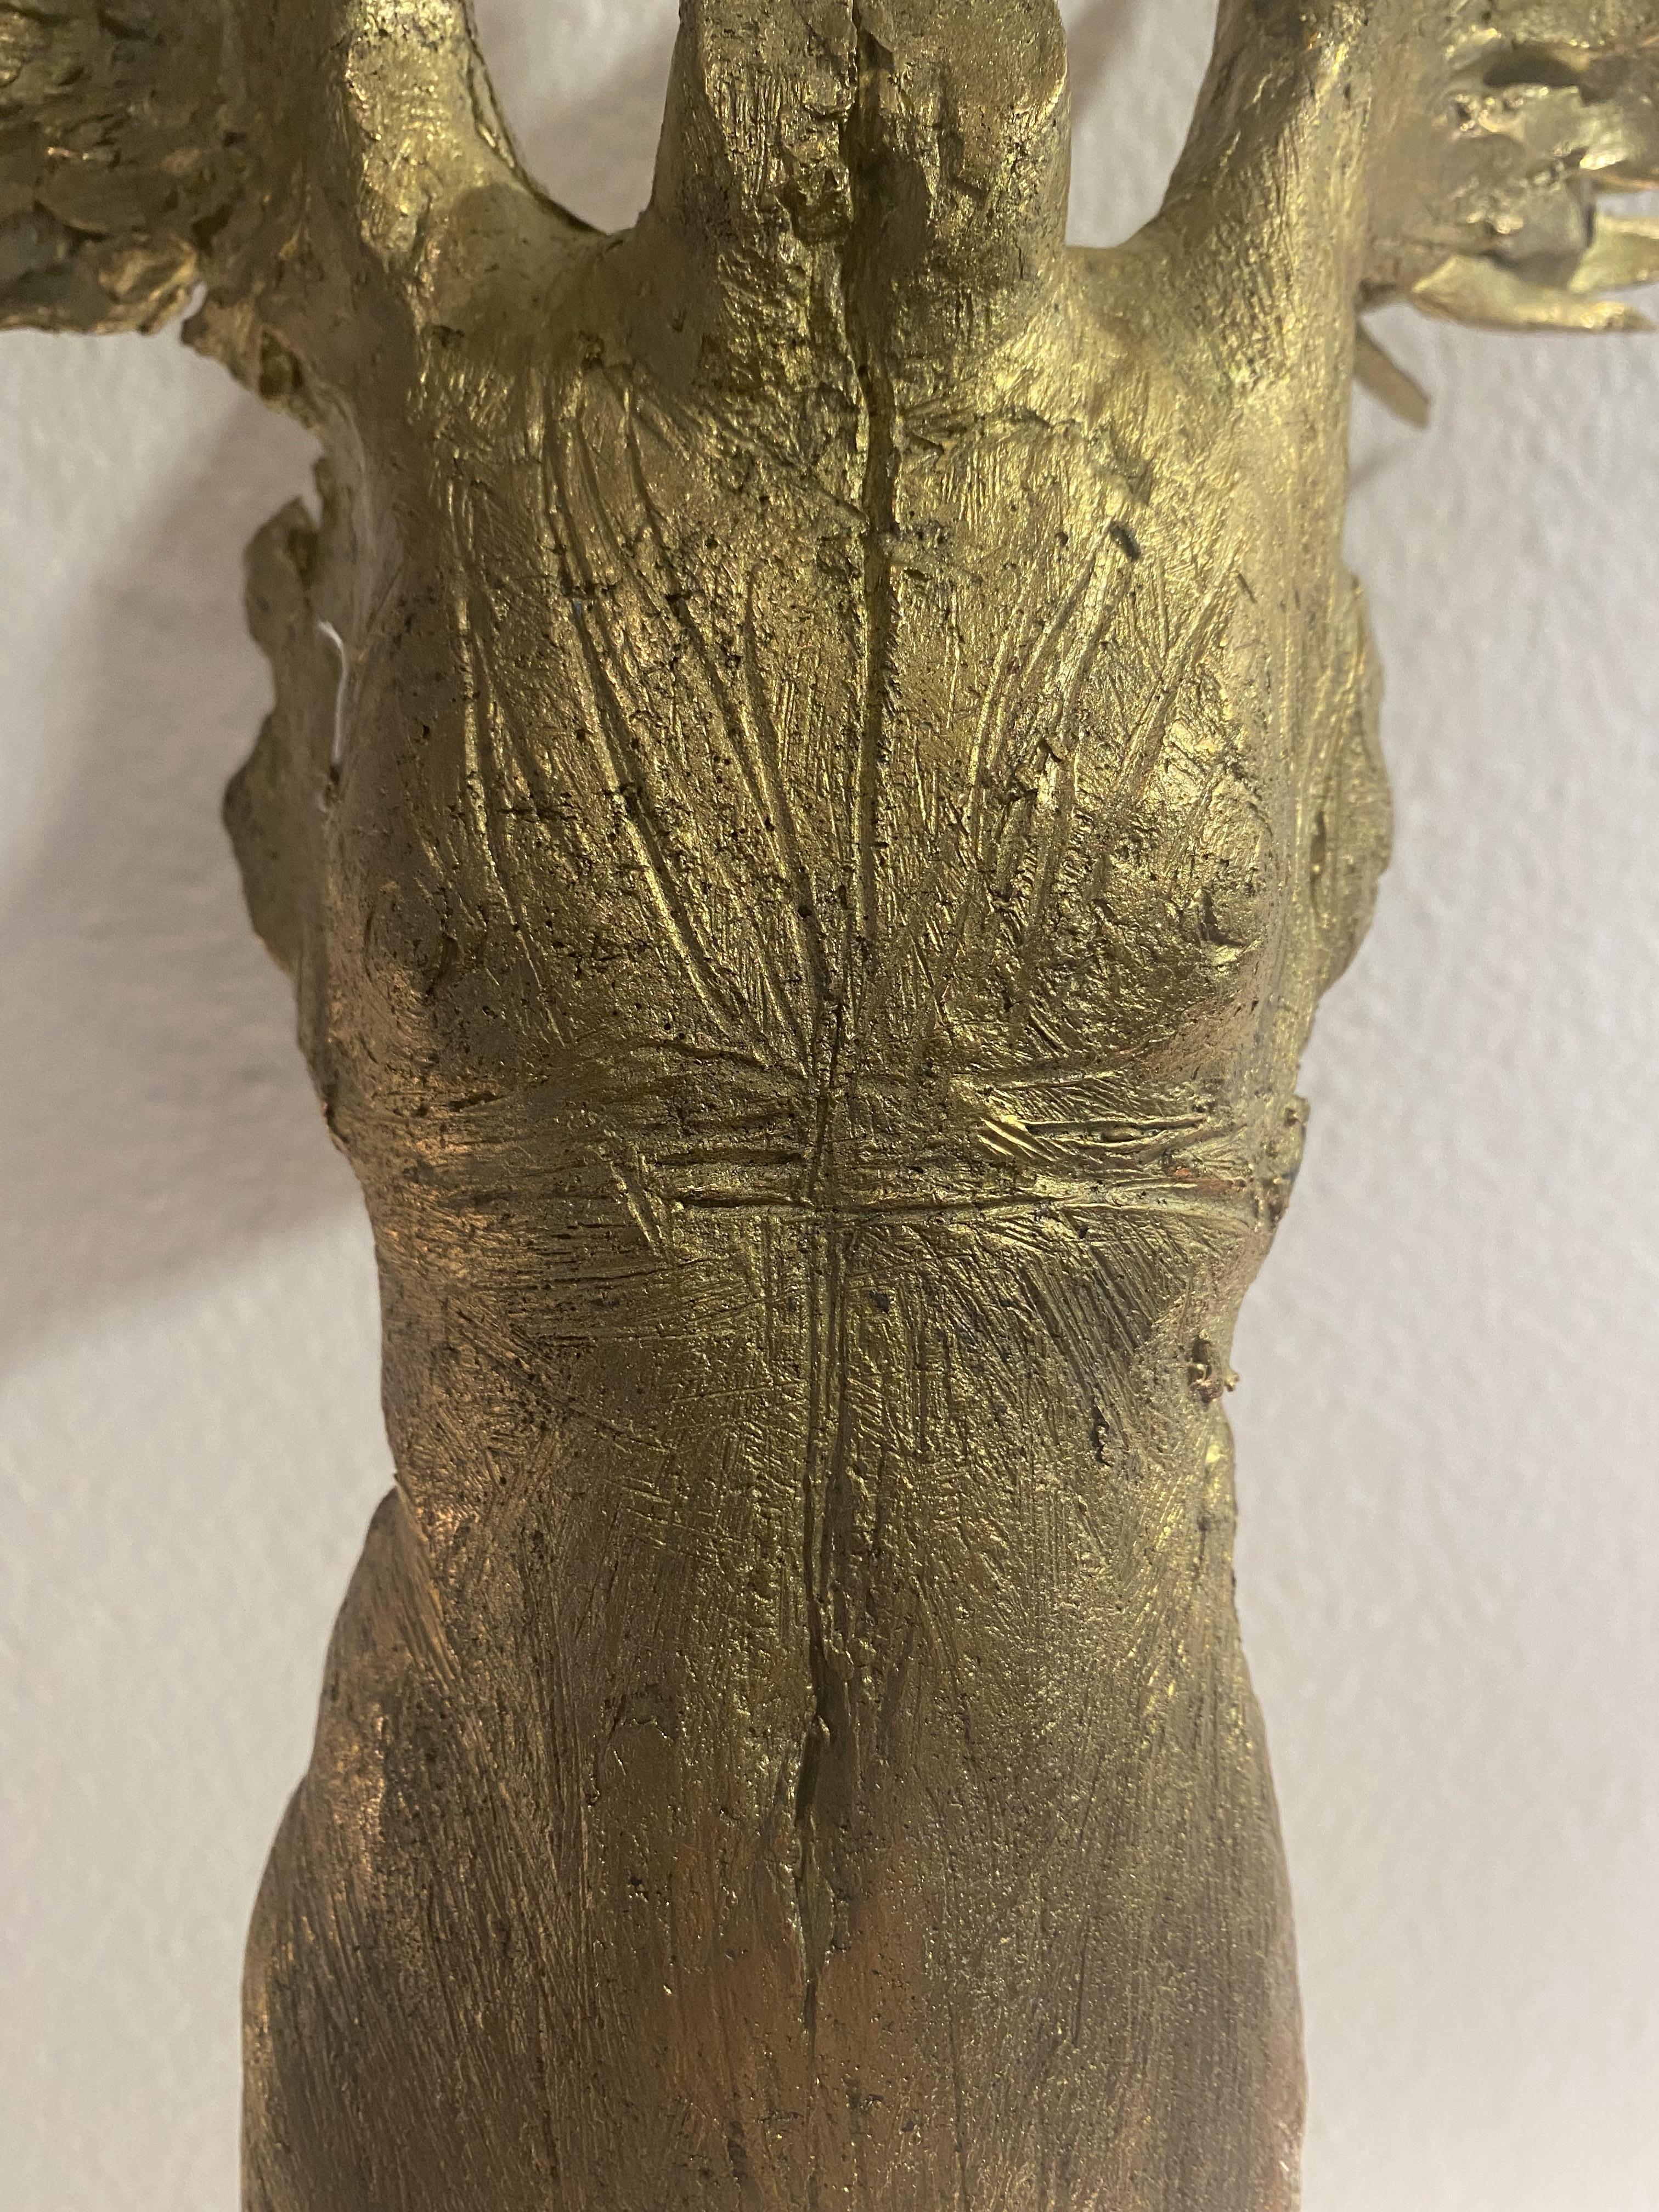 Brass guardian Angel sculpture, unique proof by Italian Master Ugo Riva 1